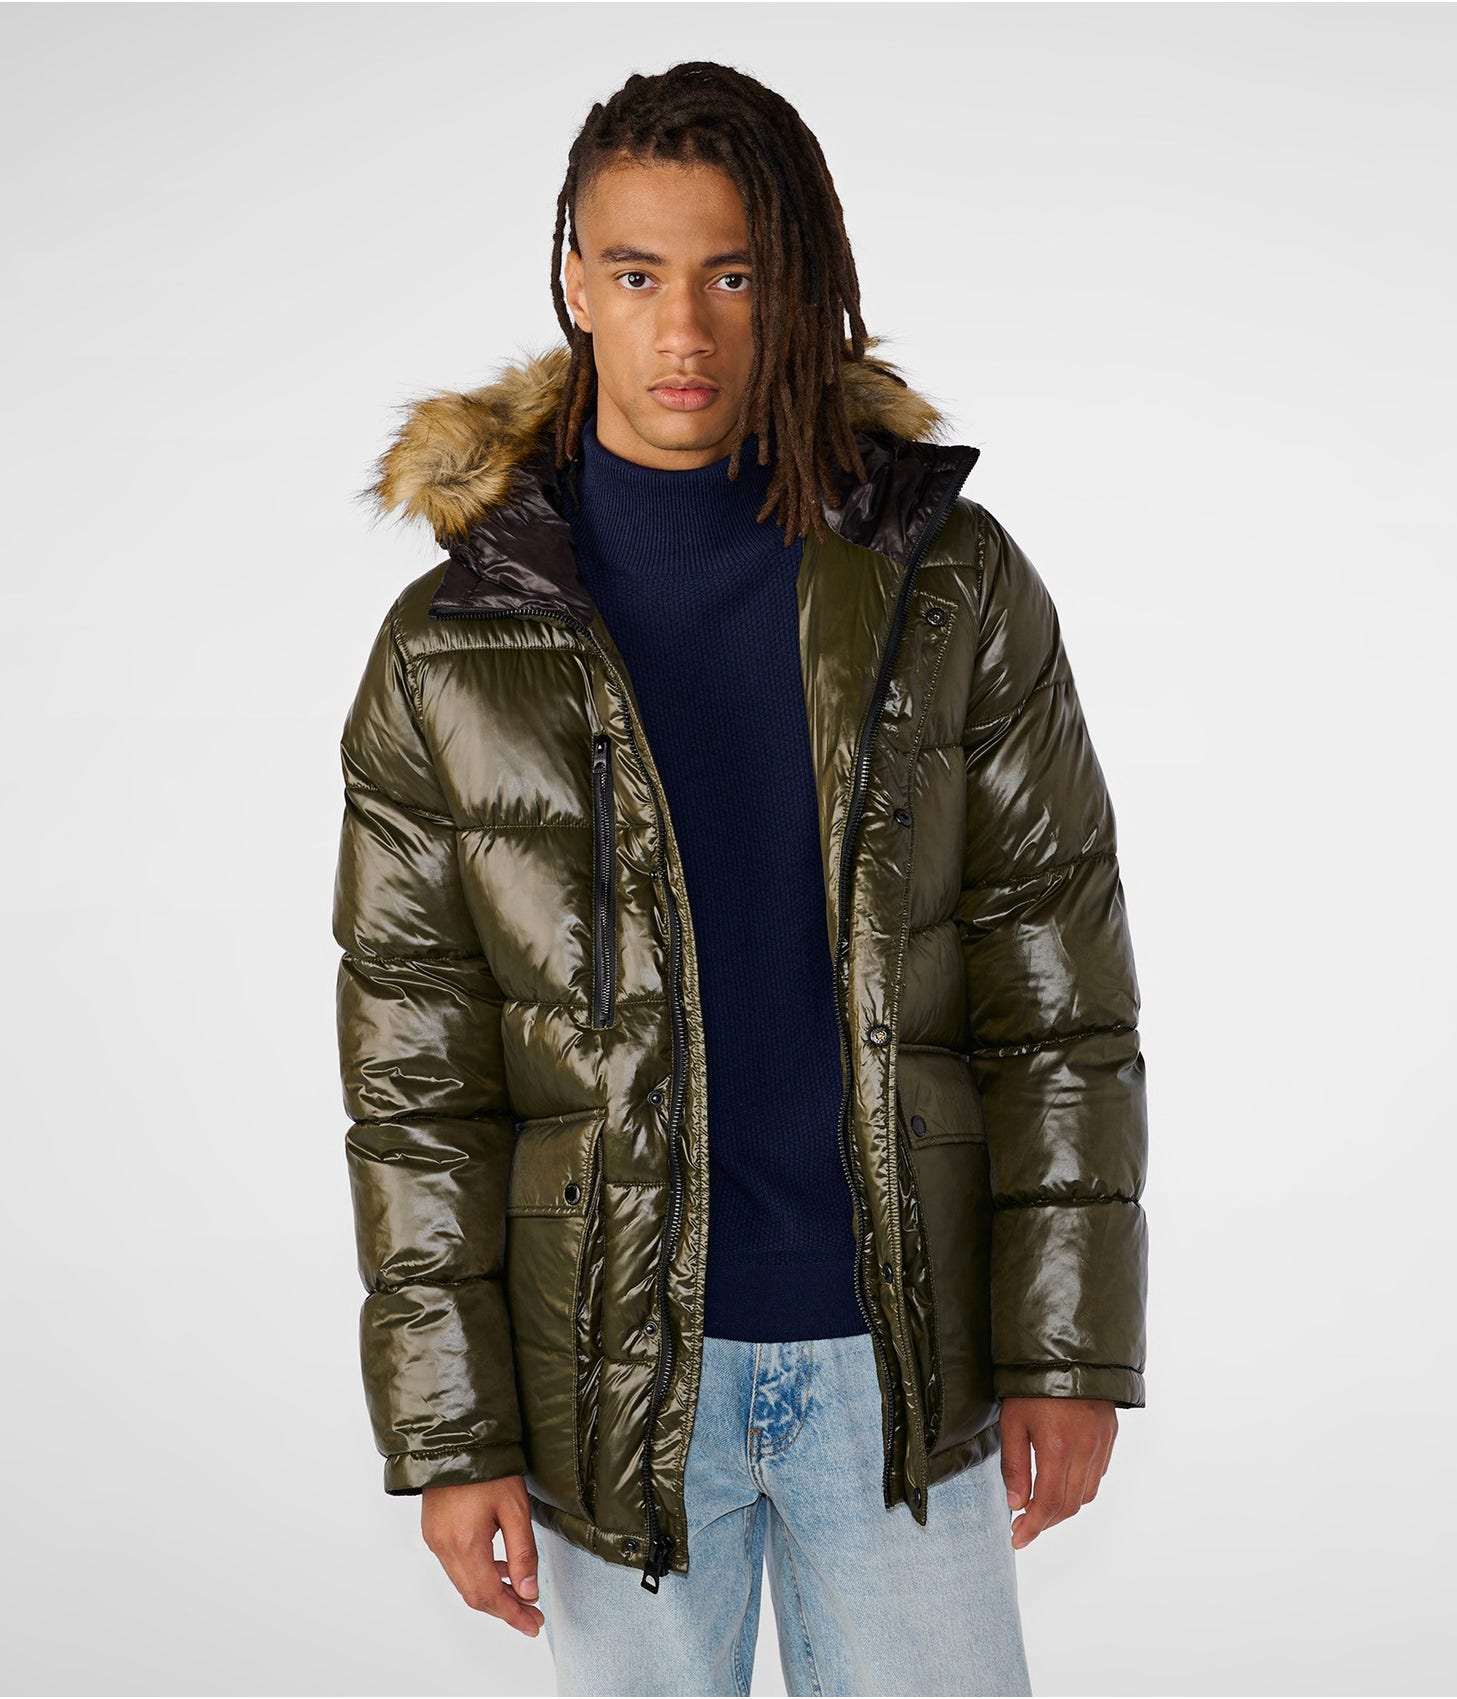 Men's Leather Puffer Jacket in Green With Fur Hood